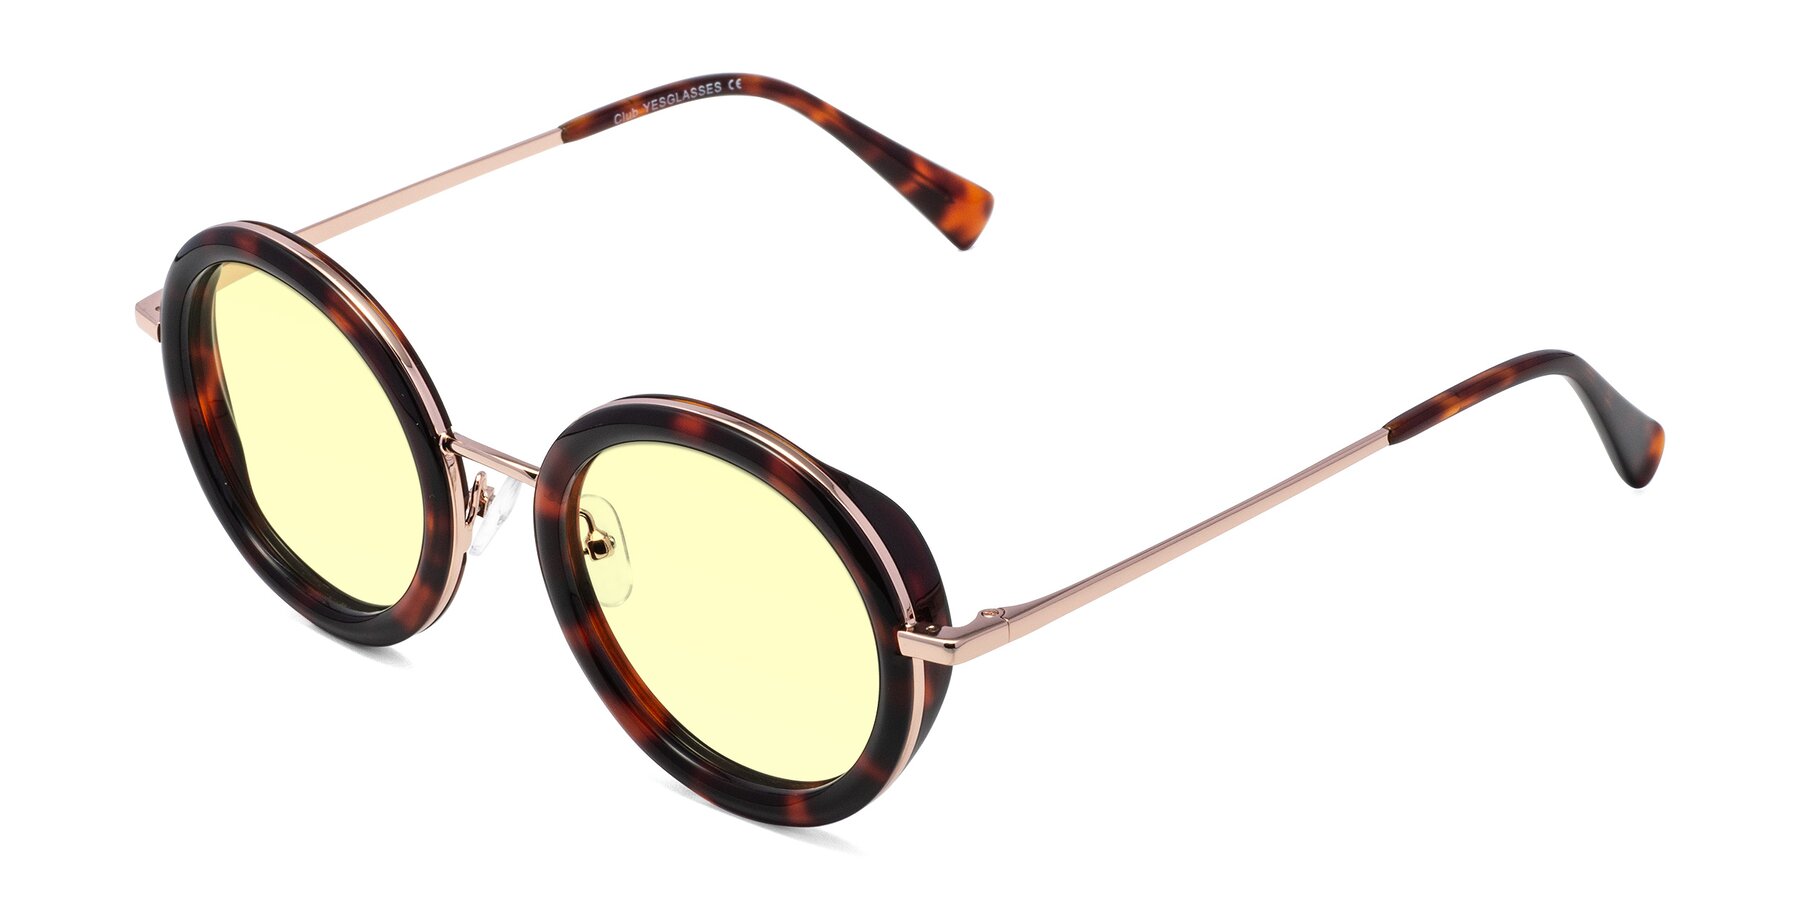 Angle of Club in Tortoise-Rose Gold with Light Yellow Tinted Lenses